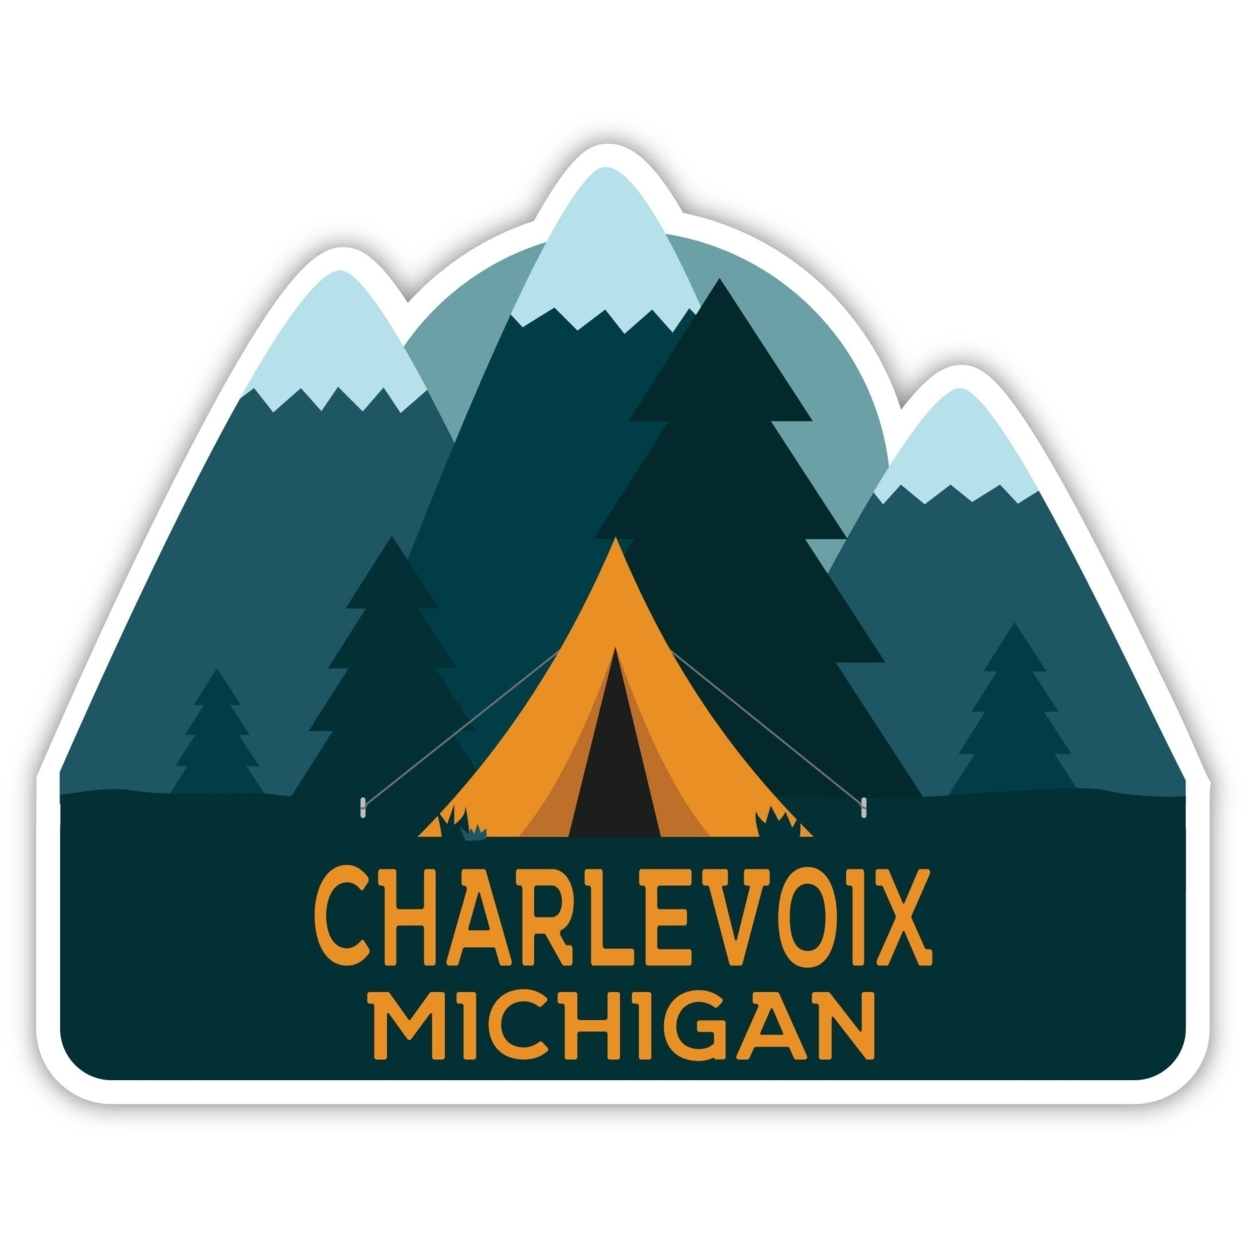 Charlevoix Michigan Souvenir Decorative Stickers (Choose Theme And Size) - 4-Pack, 8-Inch, Camp Life